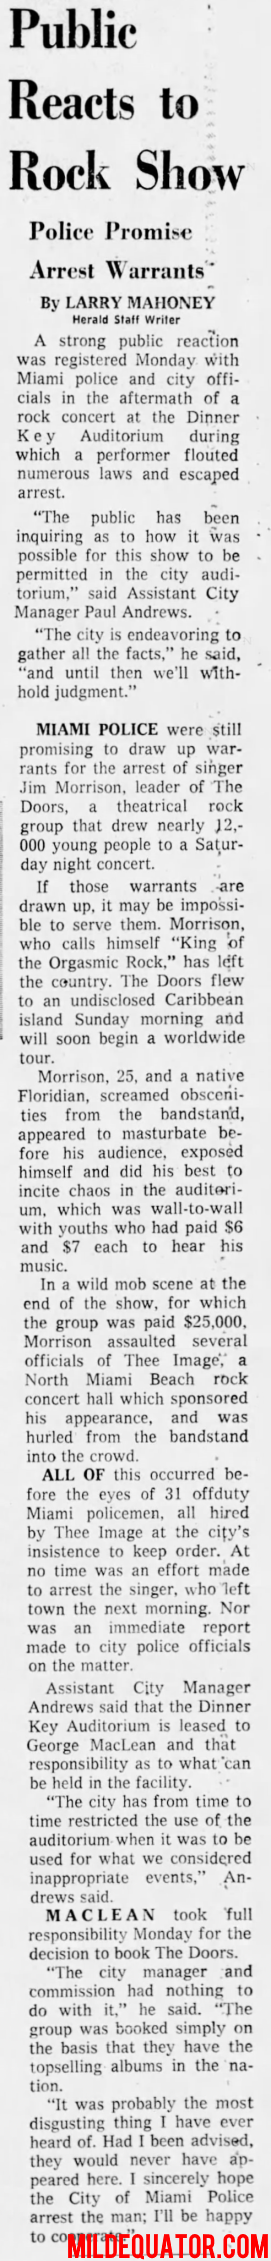 The Doors - Miami 1969 - Review